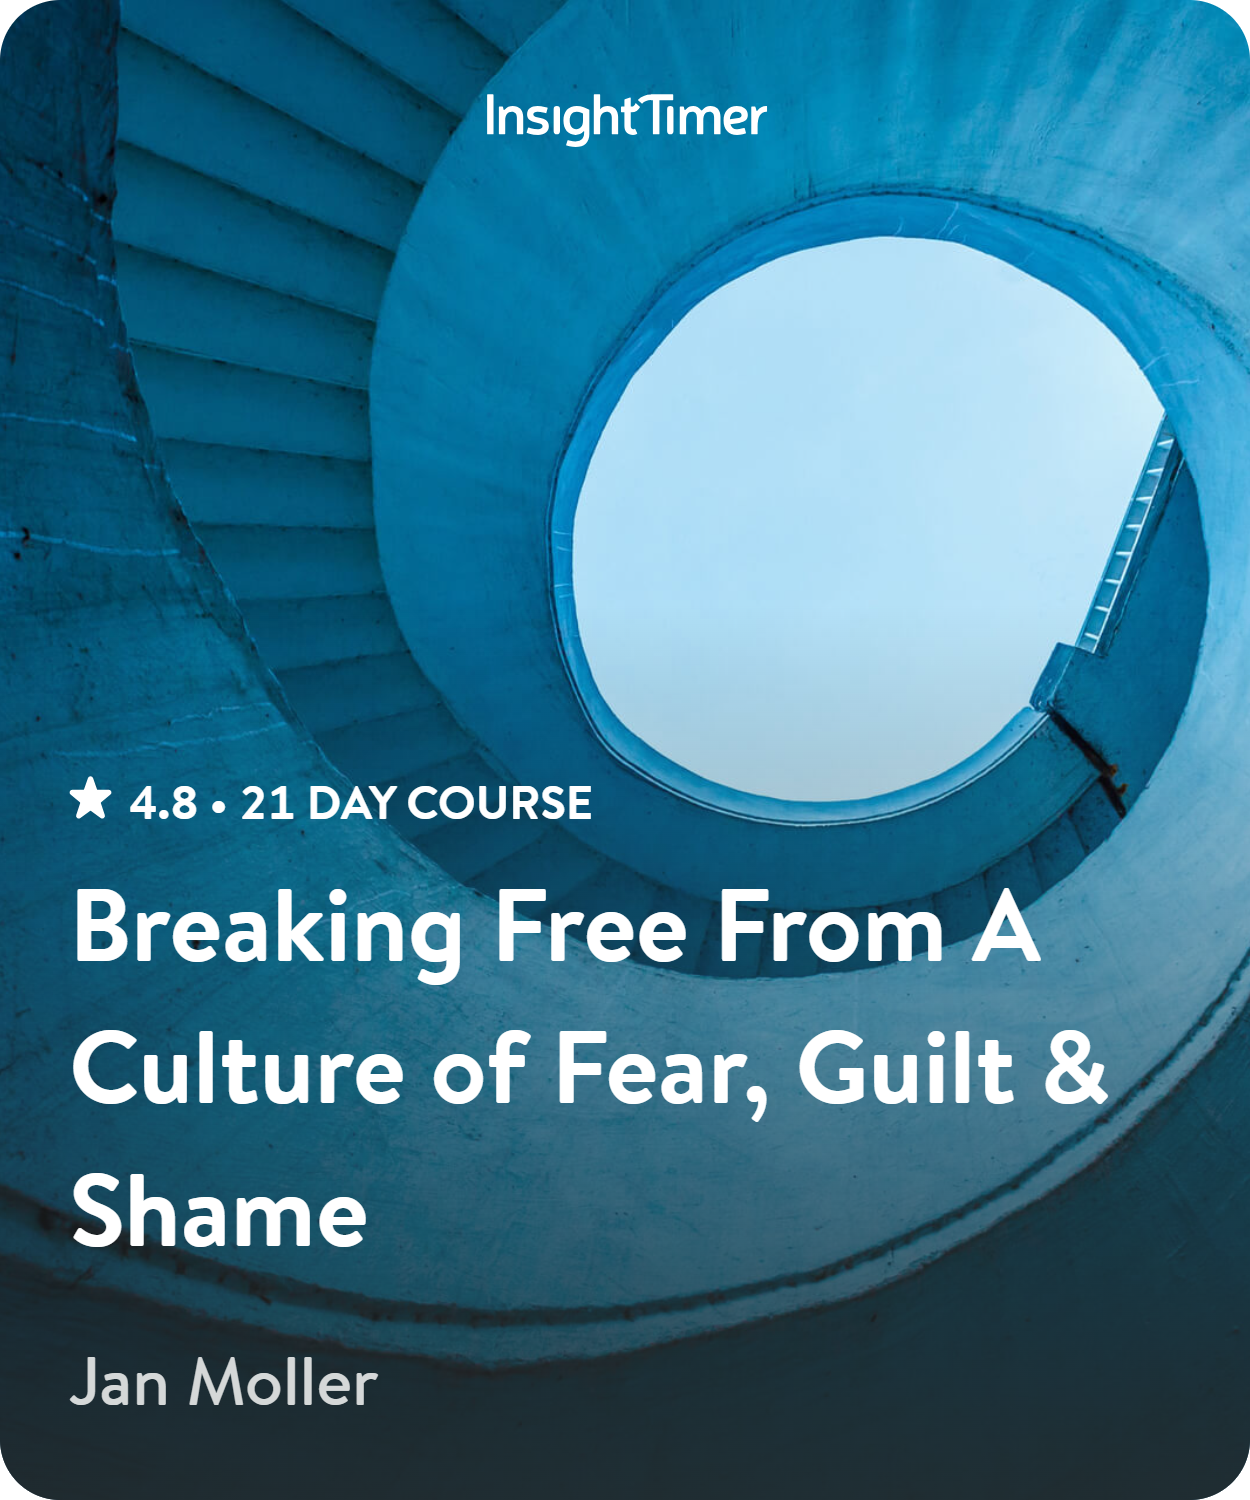 Breaking Free From A Culture of Fear, Guilt & Shame